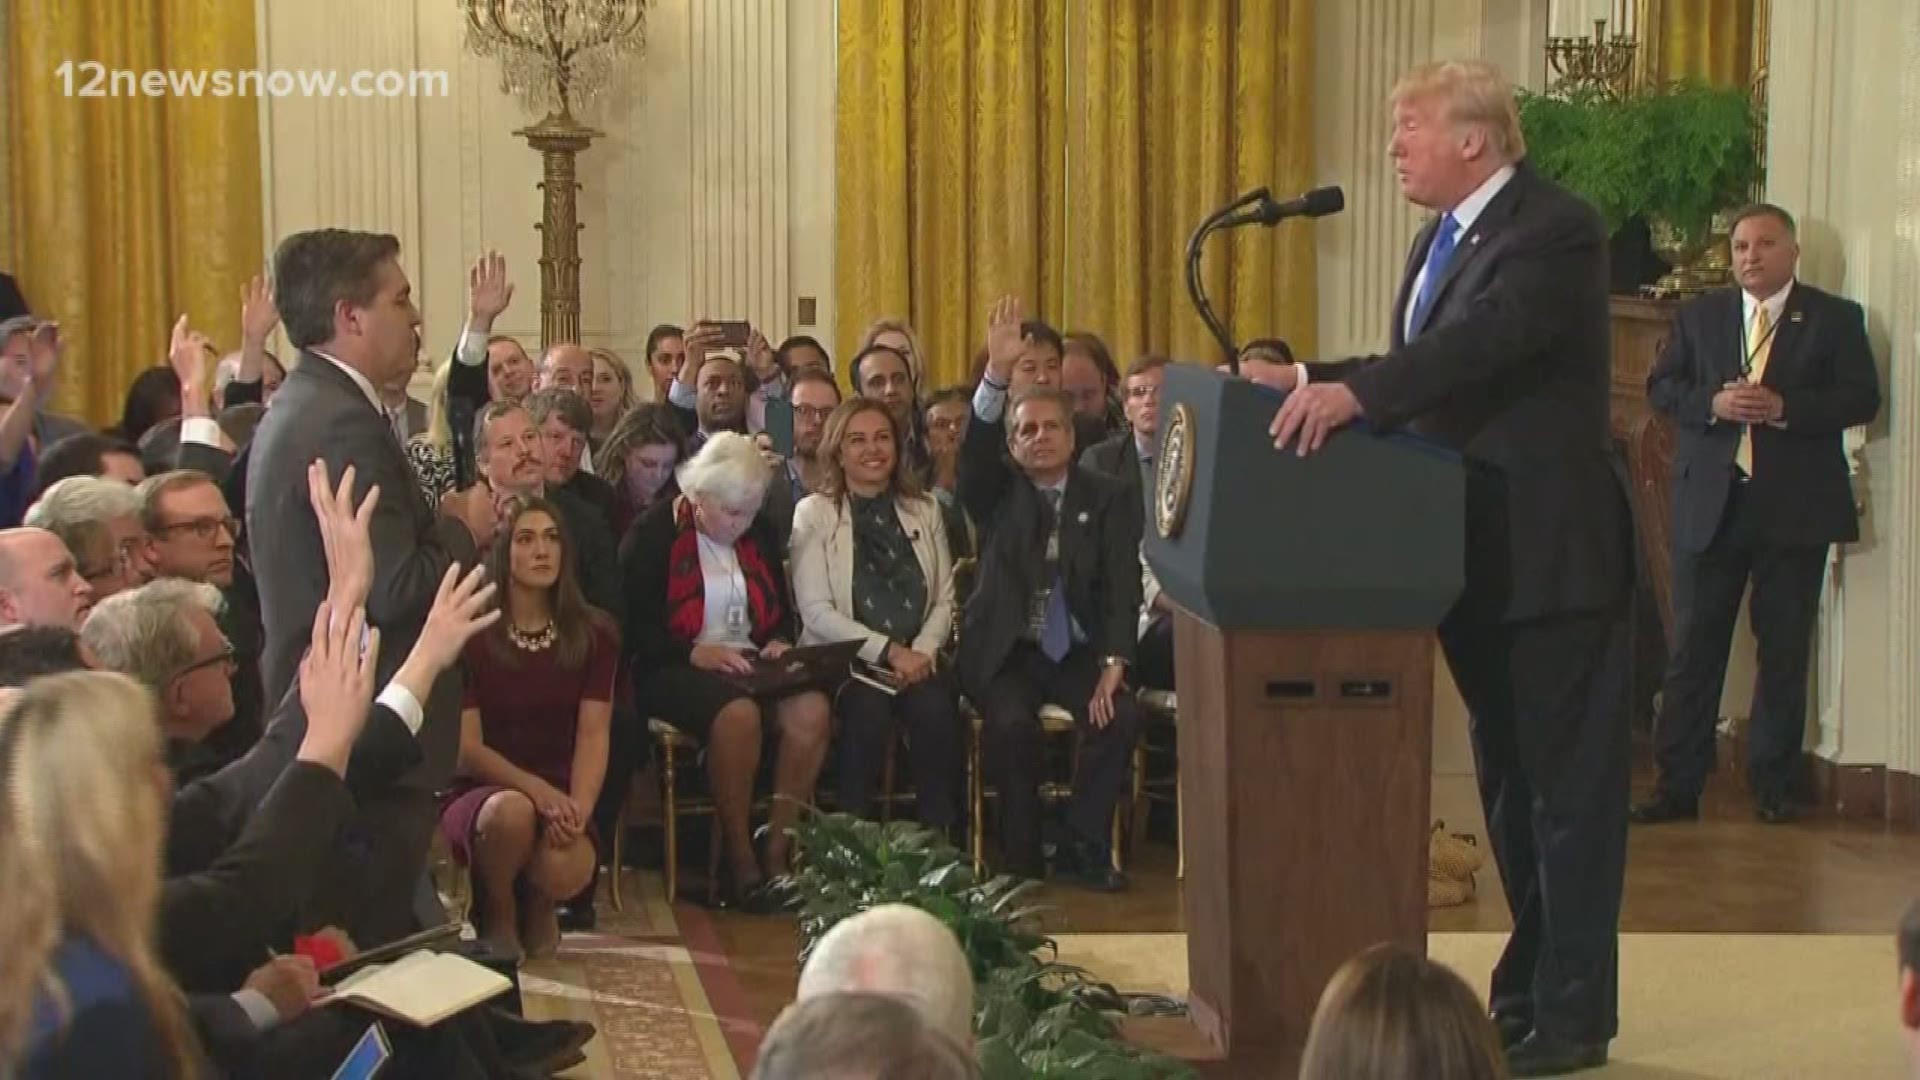 CNN's Jim Acosta returns to his post in the White House